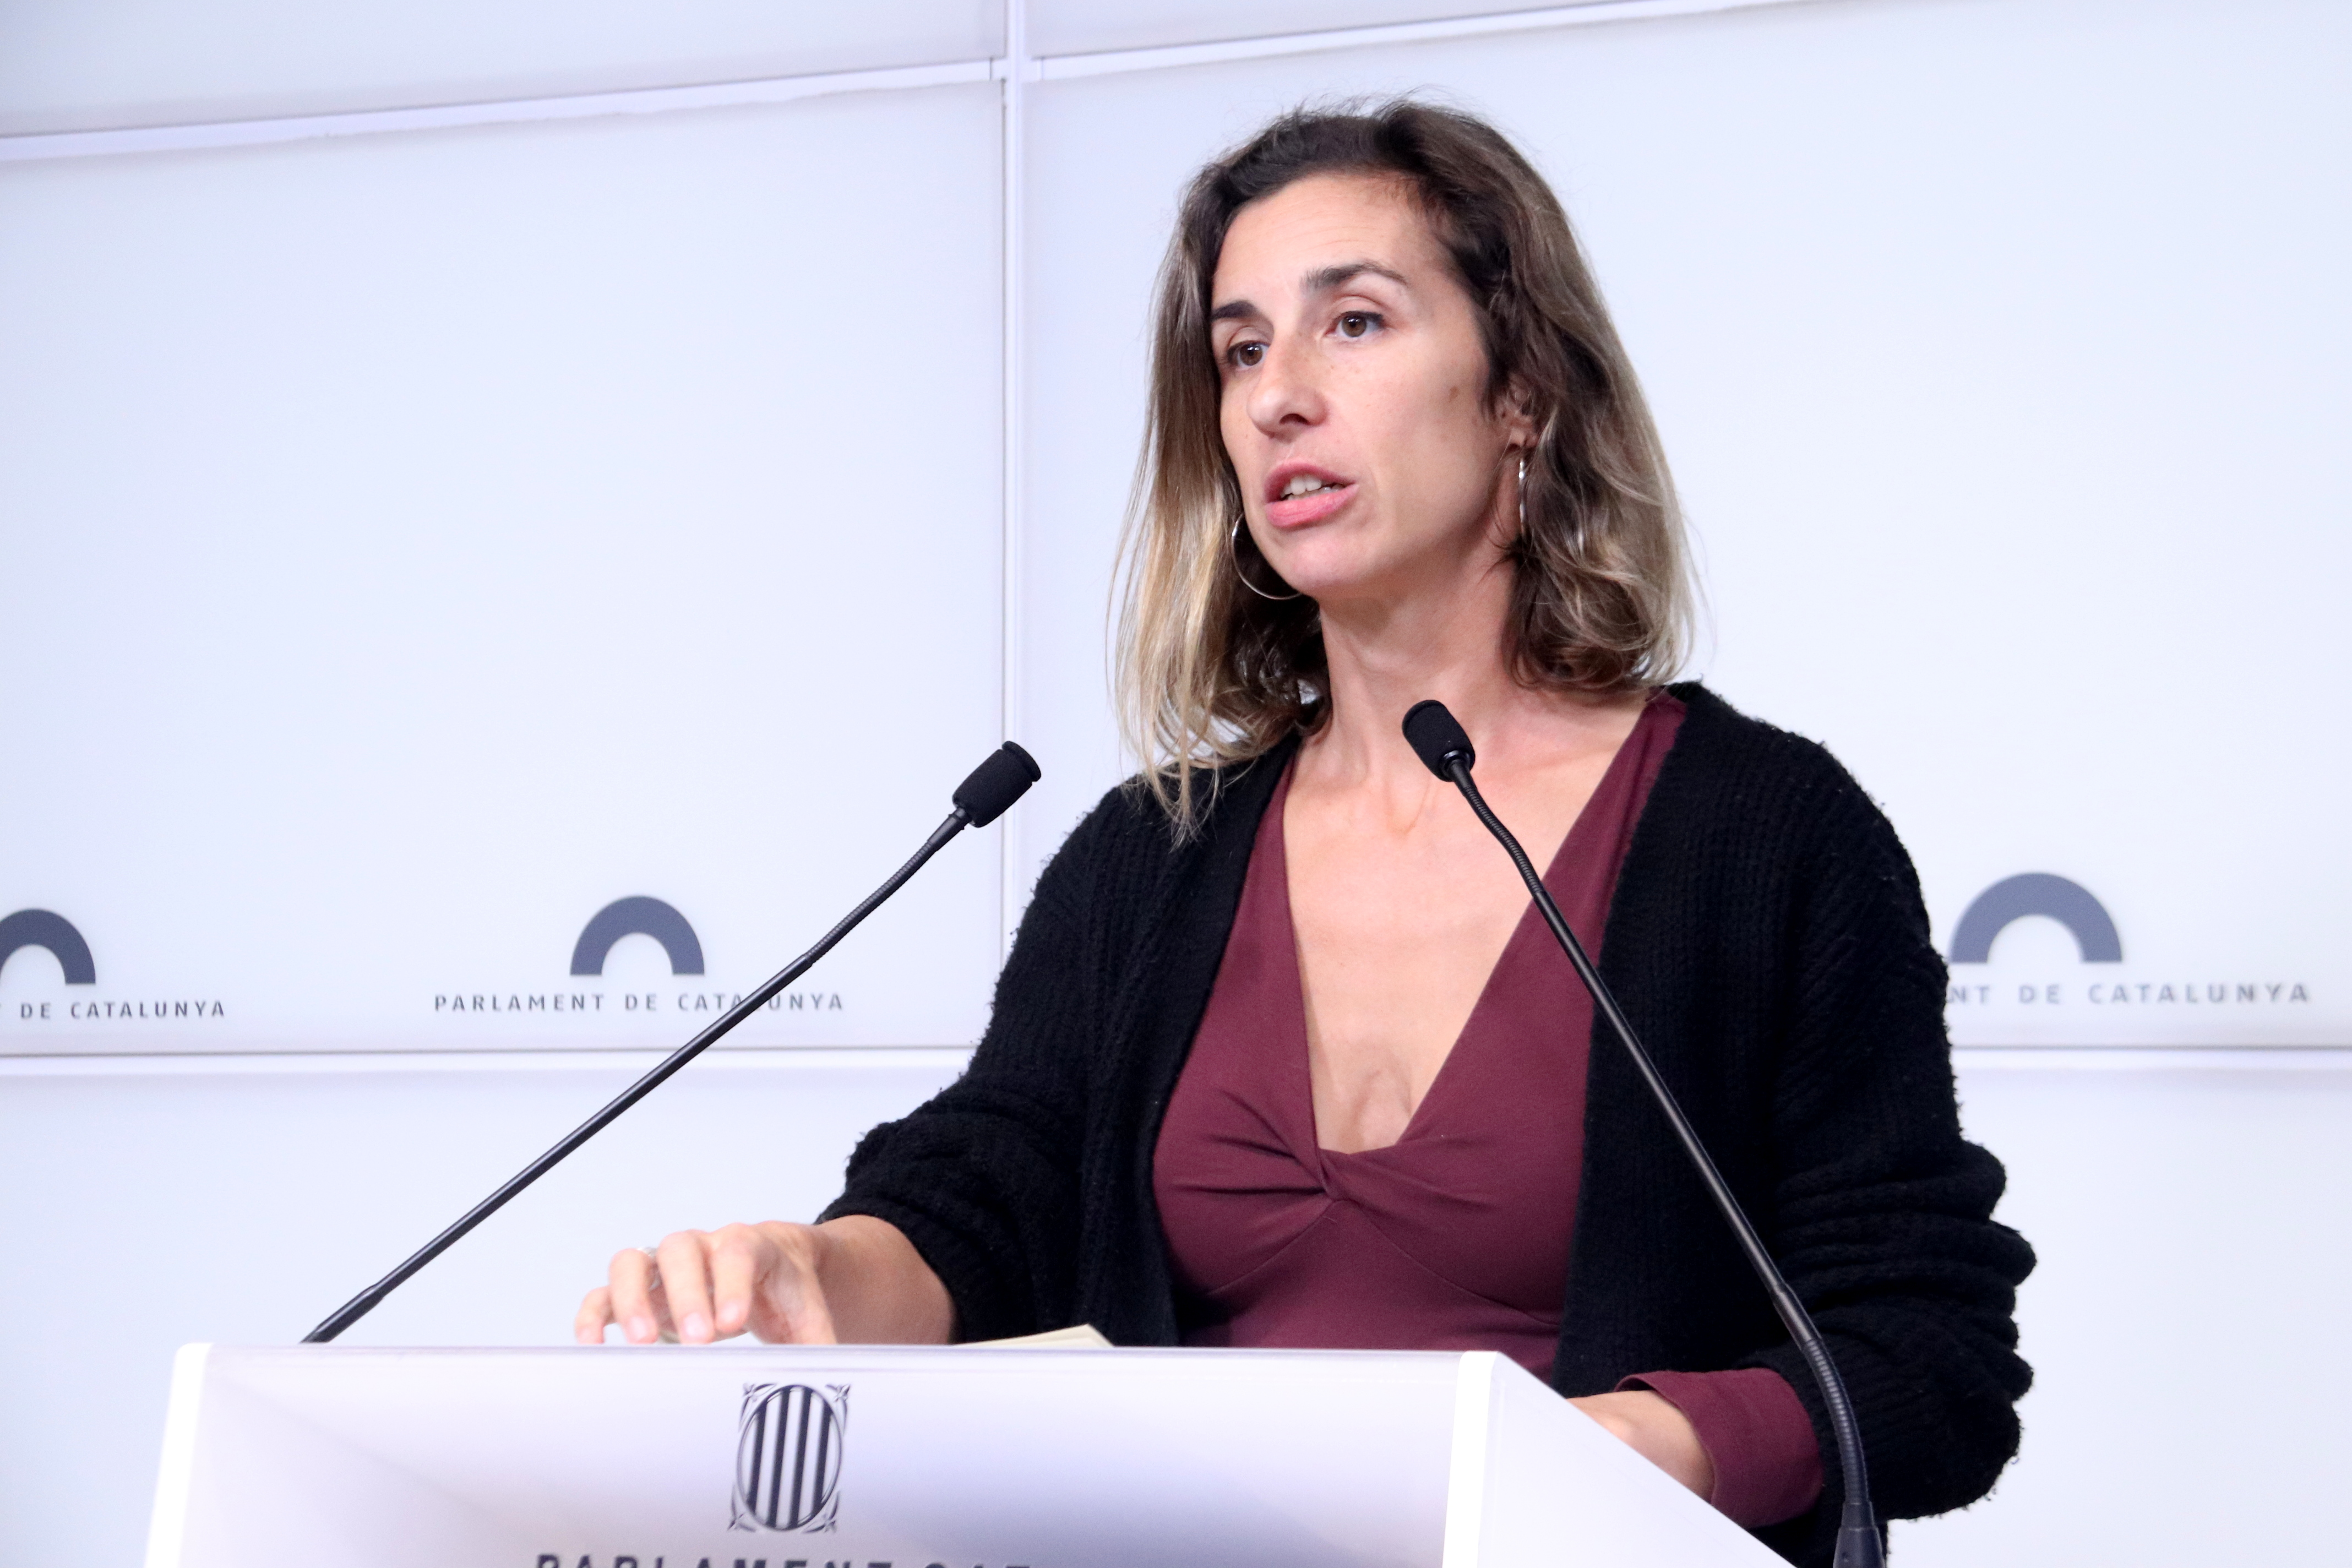 CUP candidate Laia Estrada speaks at a press conference from the Catalan parliament